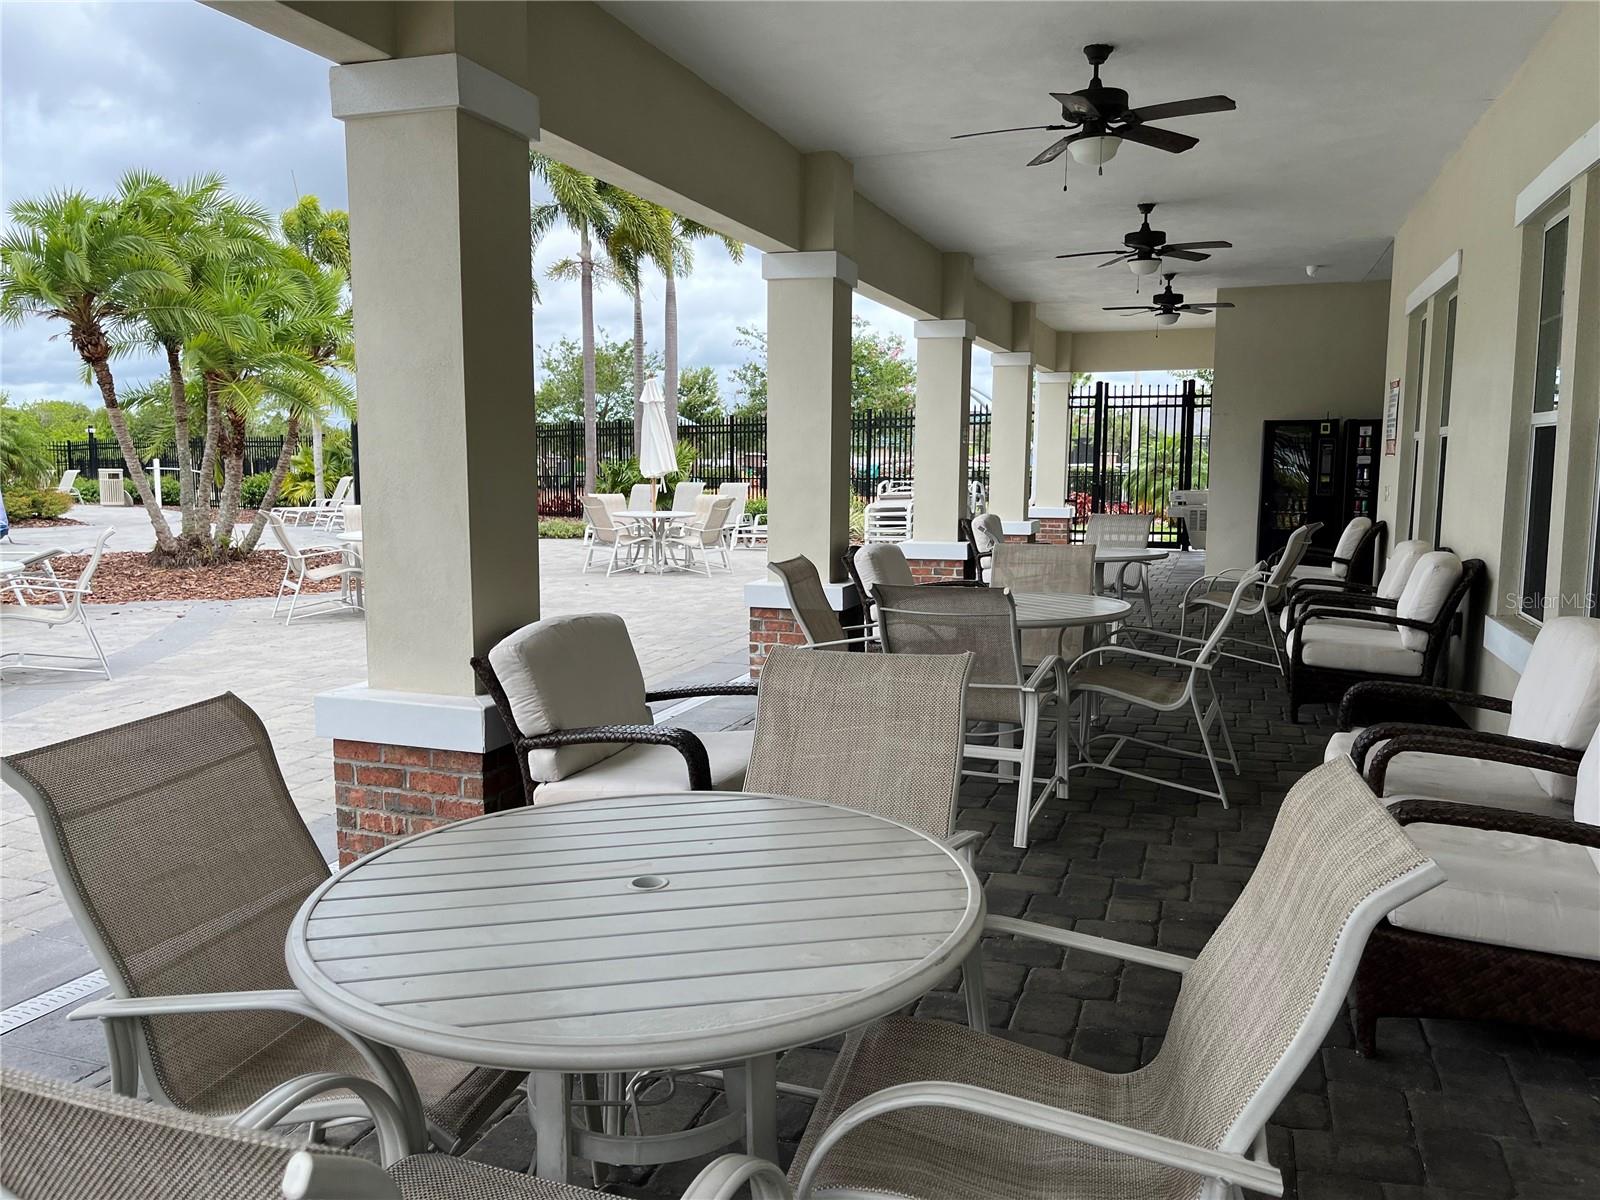 Covered patio next to pool and BBQ area, with restrooms and vending machines as well